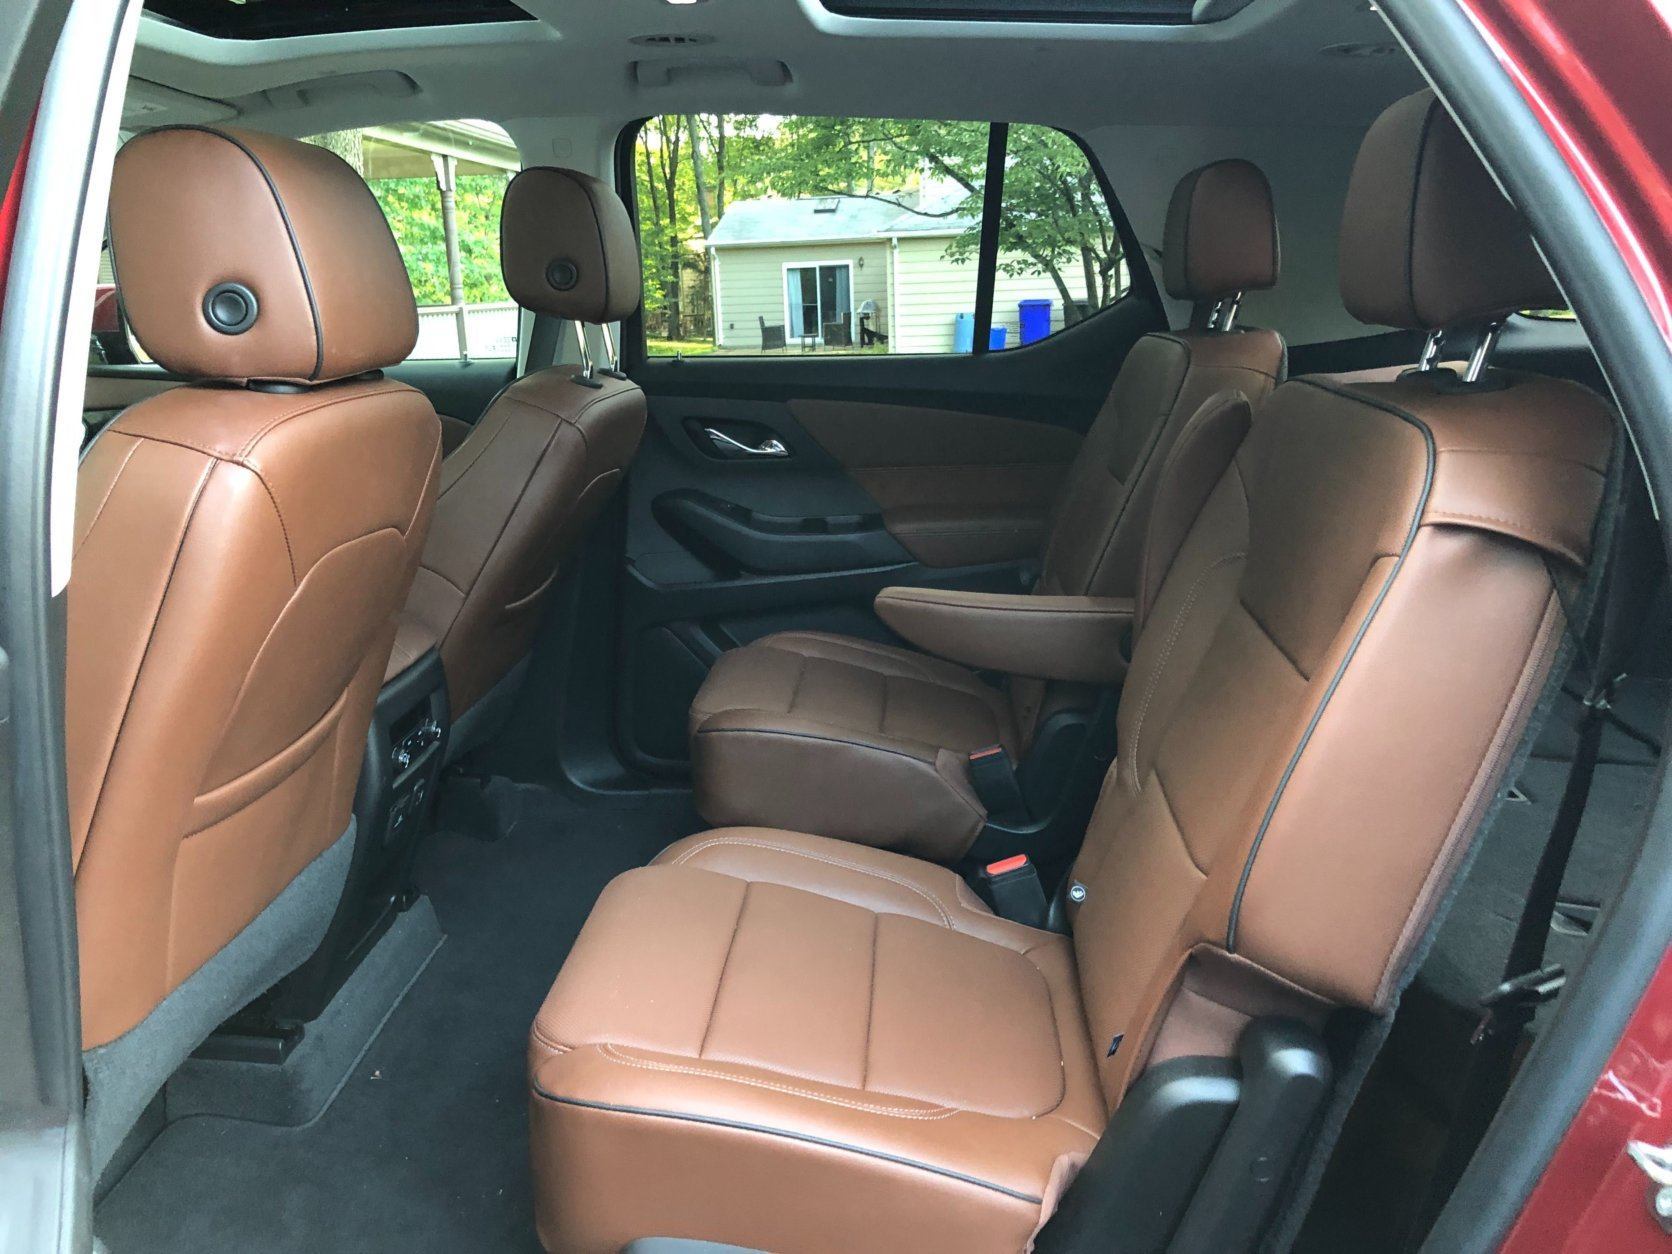 <p>You can access the third row by snaking through the middle row seats or flip a chair forward and crawl in. You have a surprising amount of storage space with all the seats in use. There’s even extra storage under the floor.</p>
